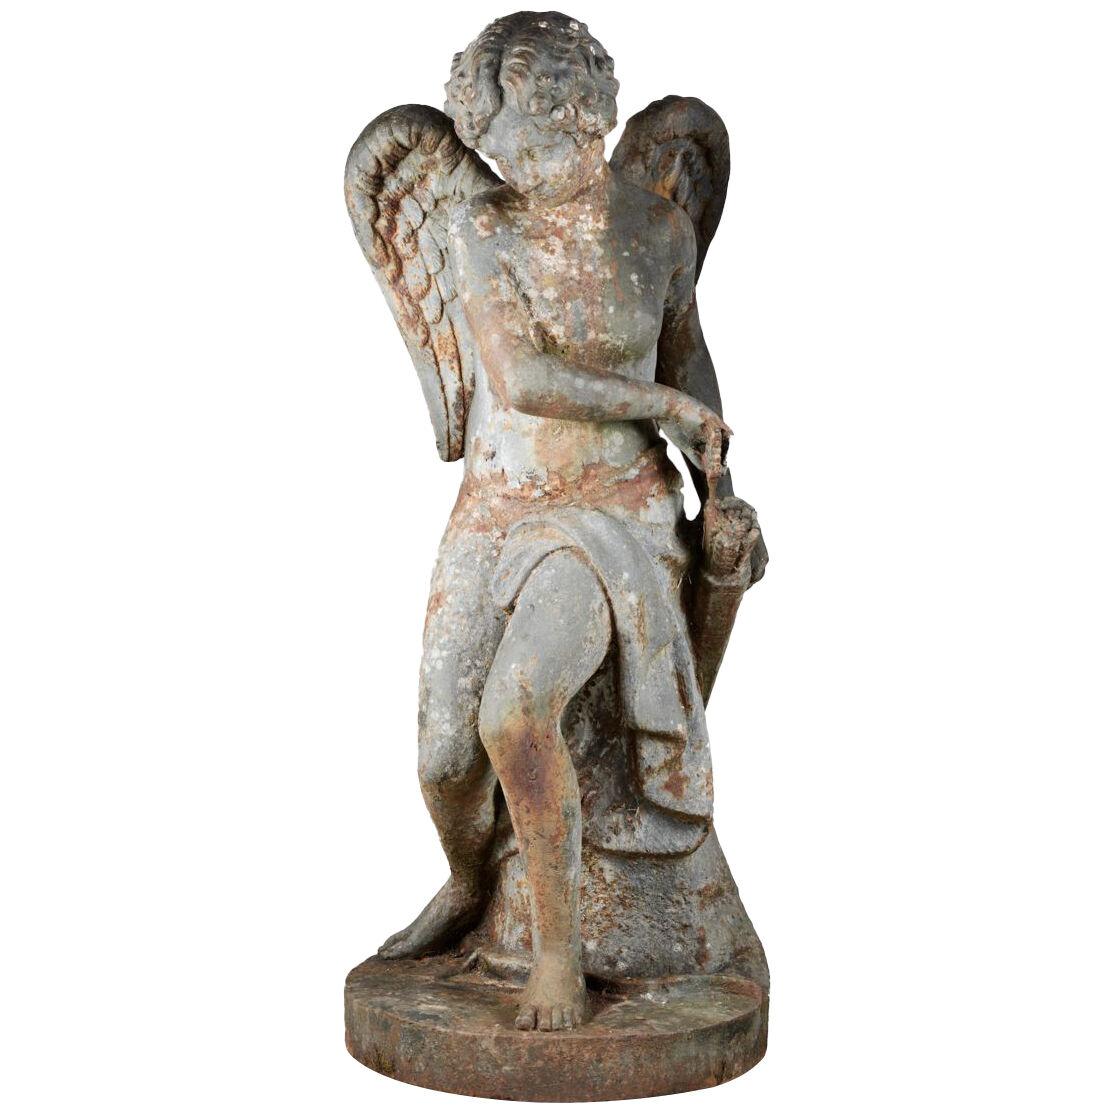 19th Century Cast Iron Statue of a Seated Winged Figure